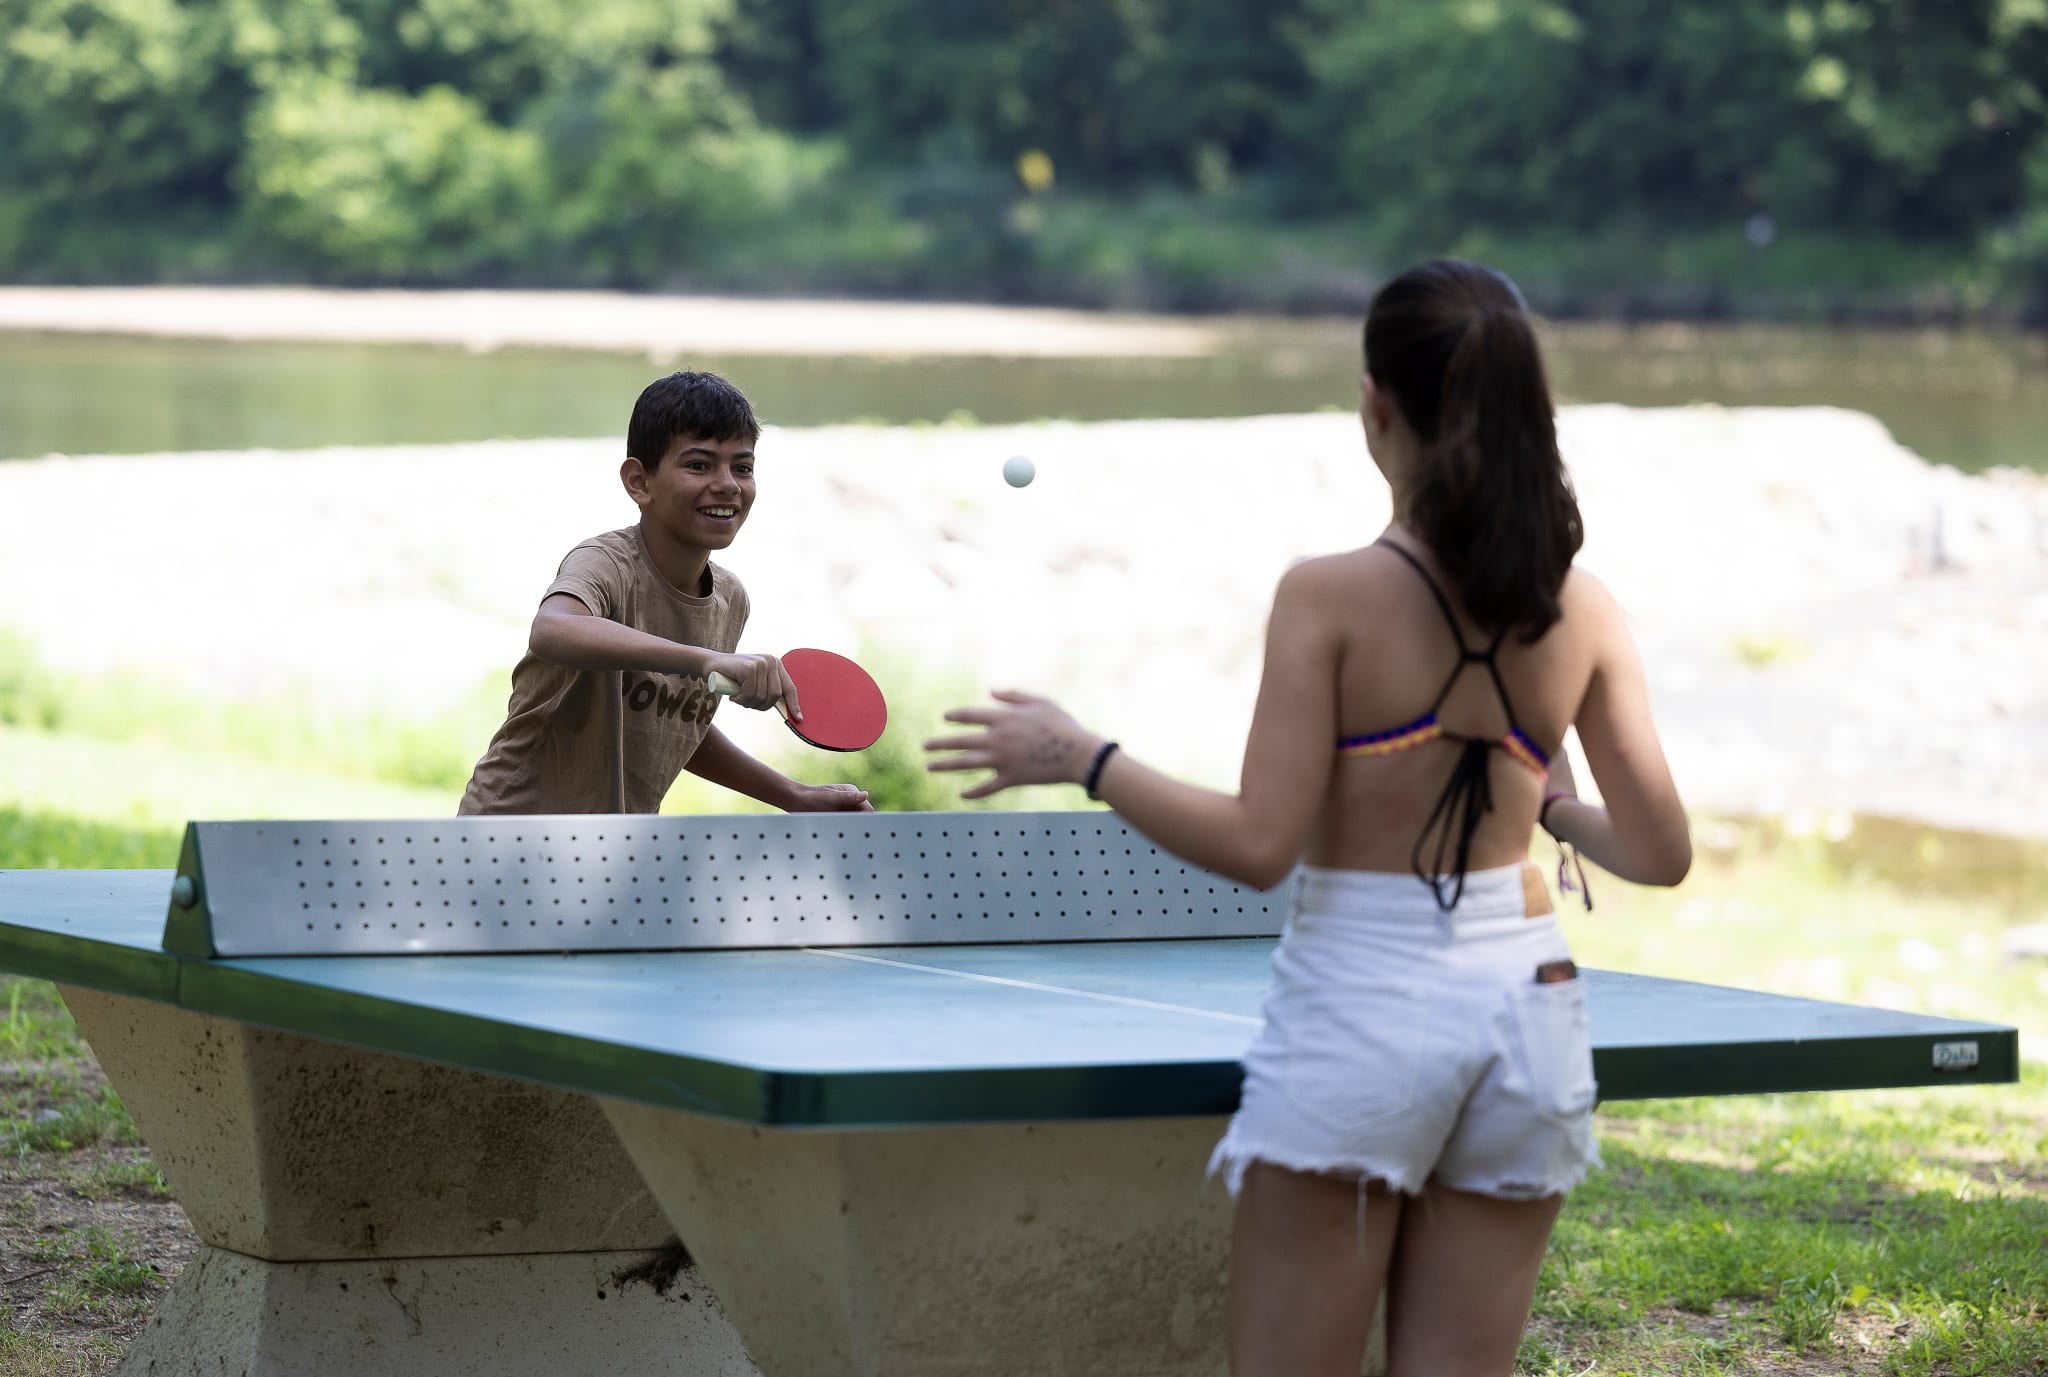 Ping-pong tables